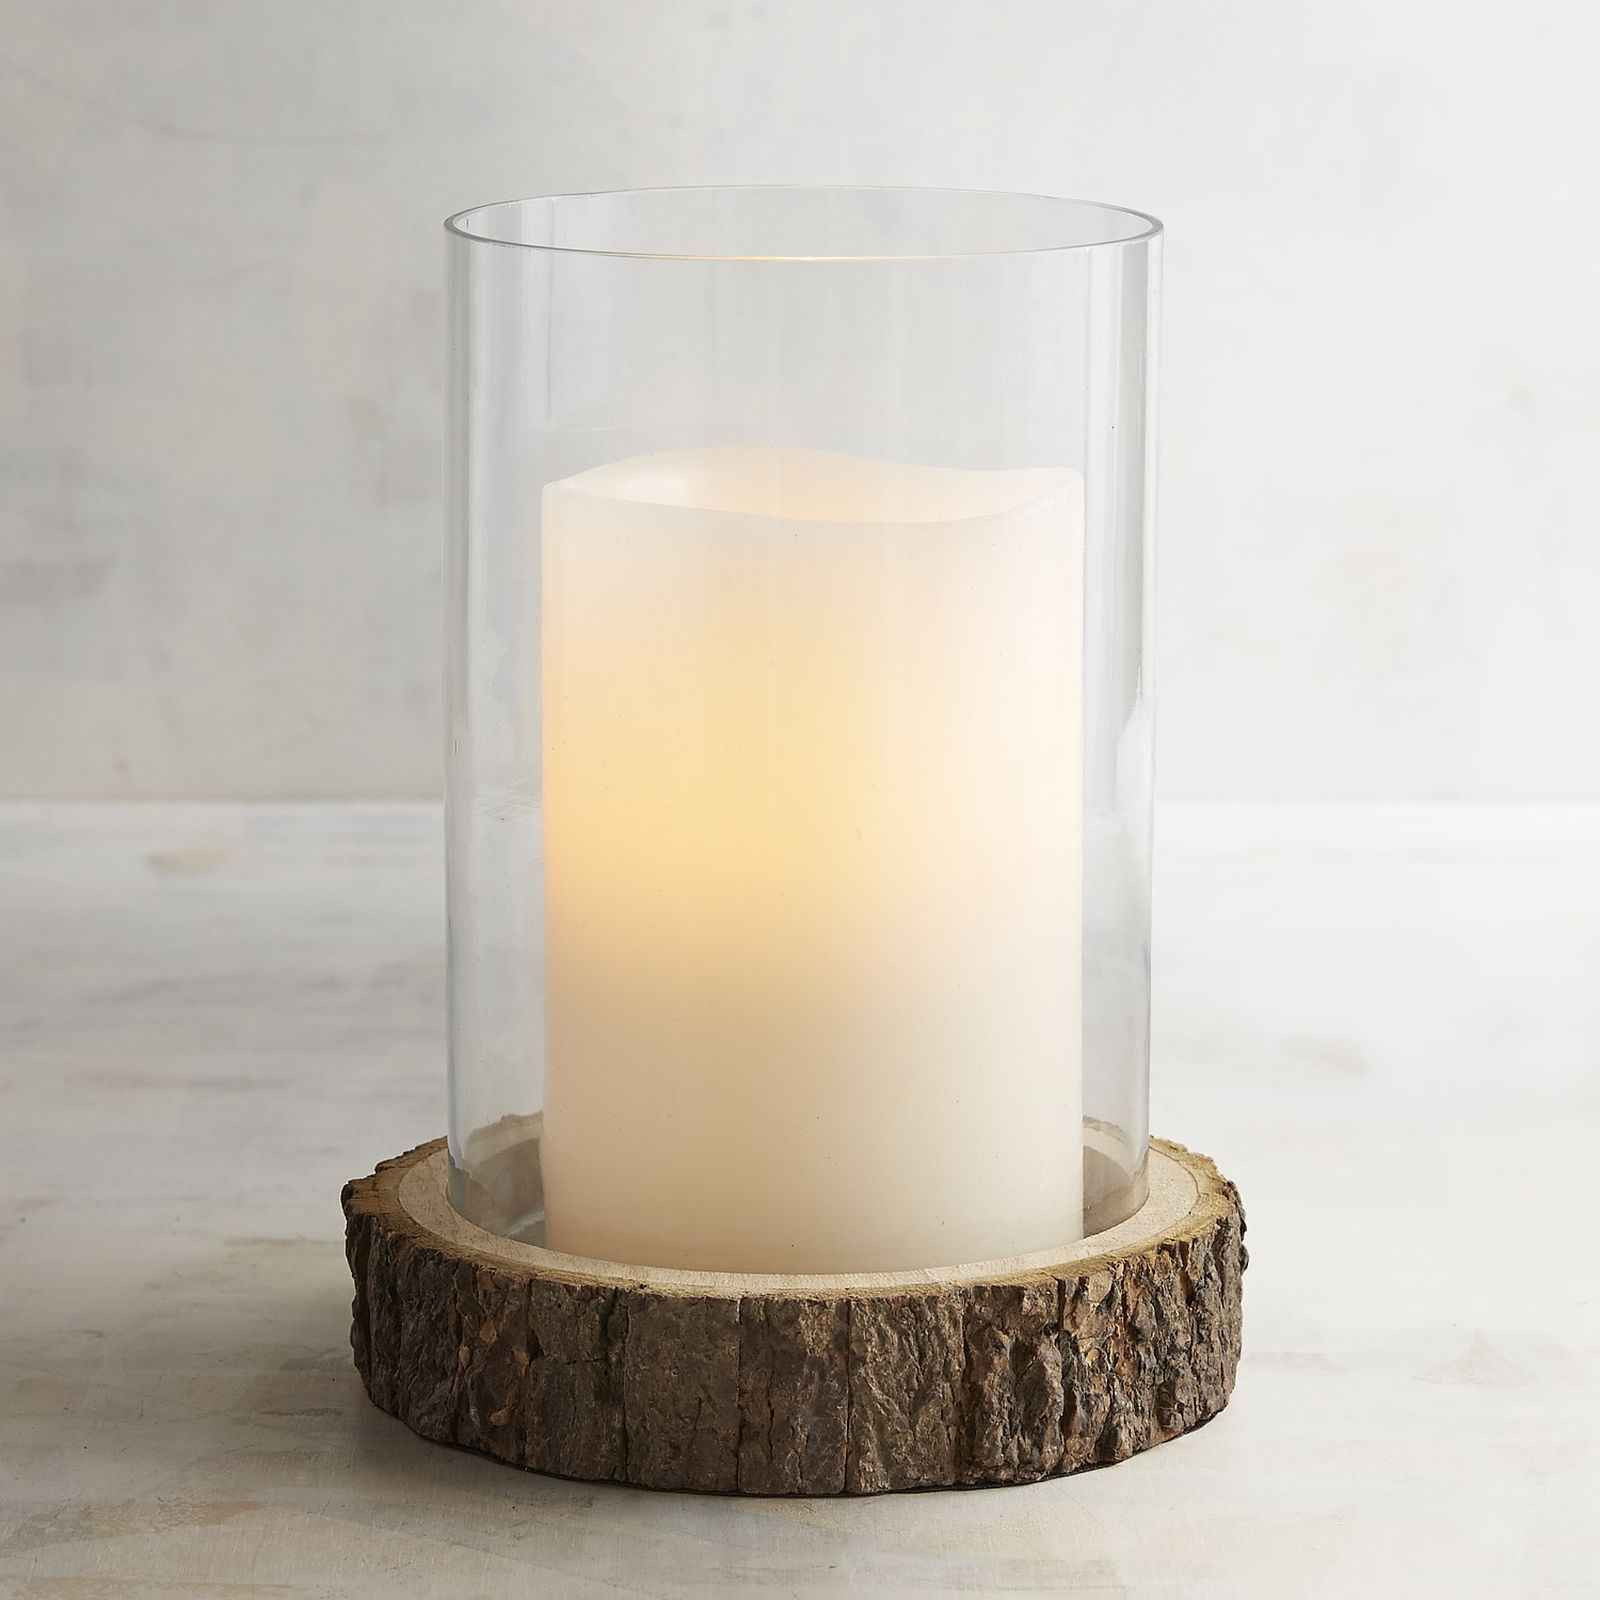 30 Trendy Gold Crackle Vase 2024 free download gold crackle vase of crackle glass vase awesome oval crackle glass vase a17 50 crackle throughout crackle glass vase awesome oval crackle glass vase a17 50 crackle glass hurricane candle